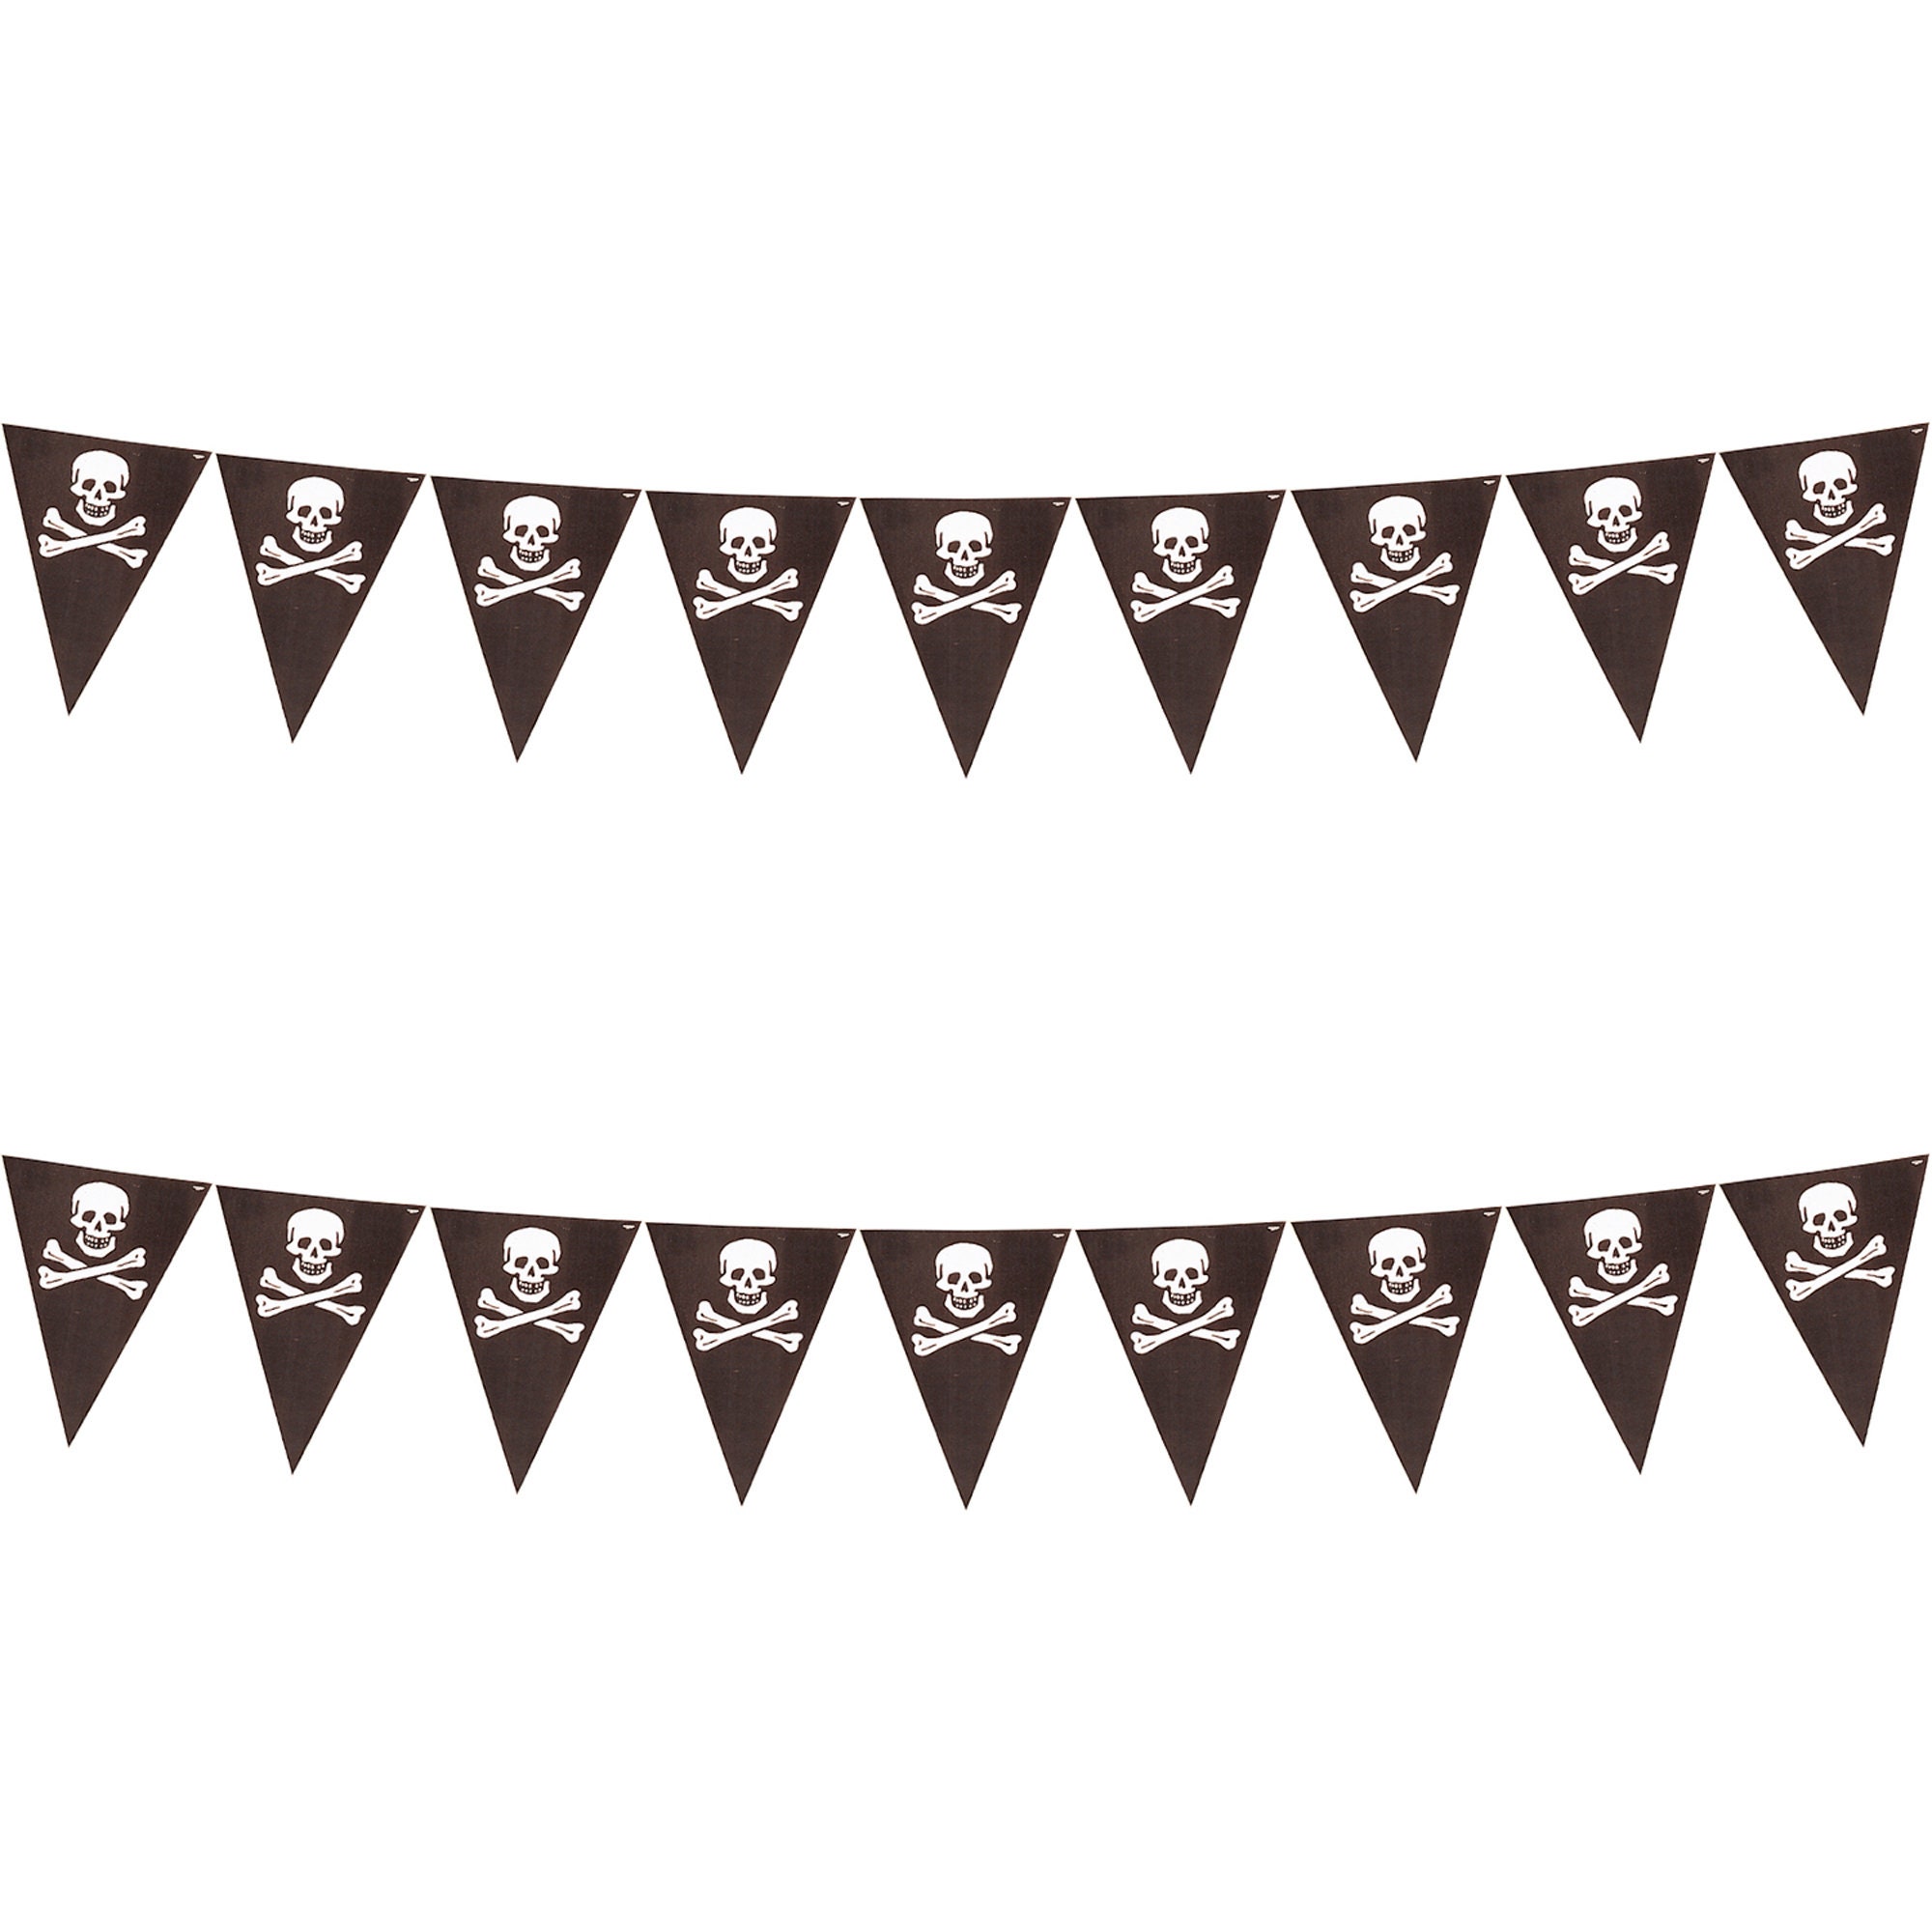 Pirate Party Supplies and Table Decorations Skull and Crossbones Black Pennant Flag Banner Garland 10.25